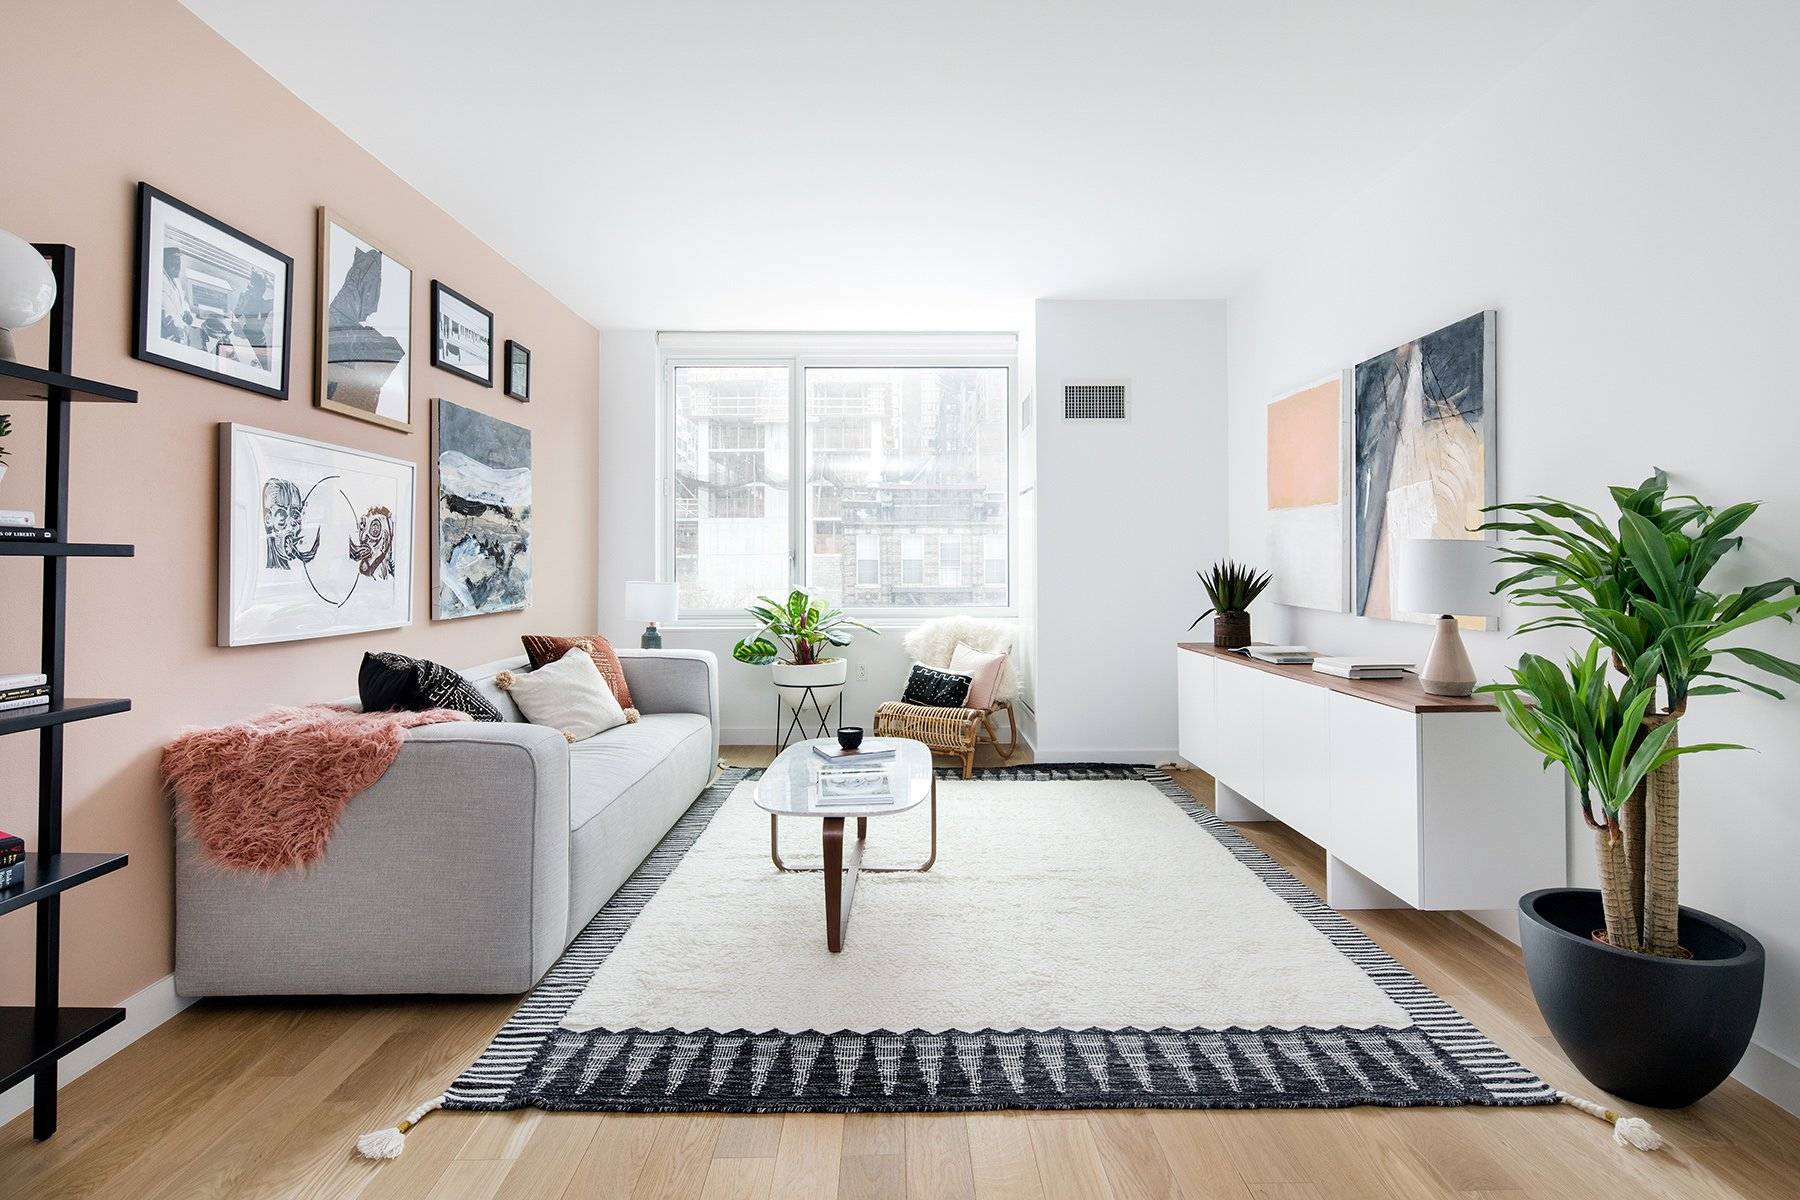 Welcome to LANA, an ambitiously re envisioned boutique luxury rental property located in the heart of Hudson Yards, Manhattan s most exciting upcoming neighborhood.